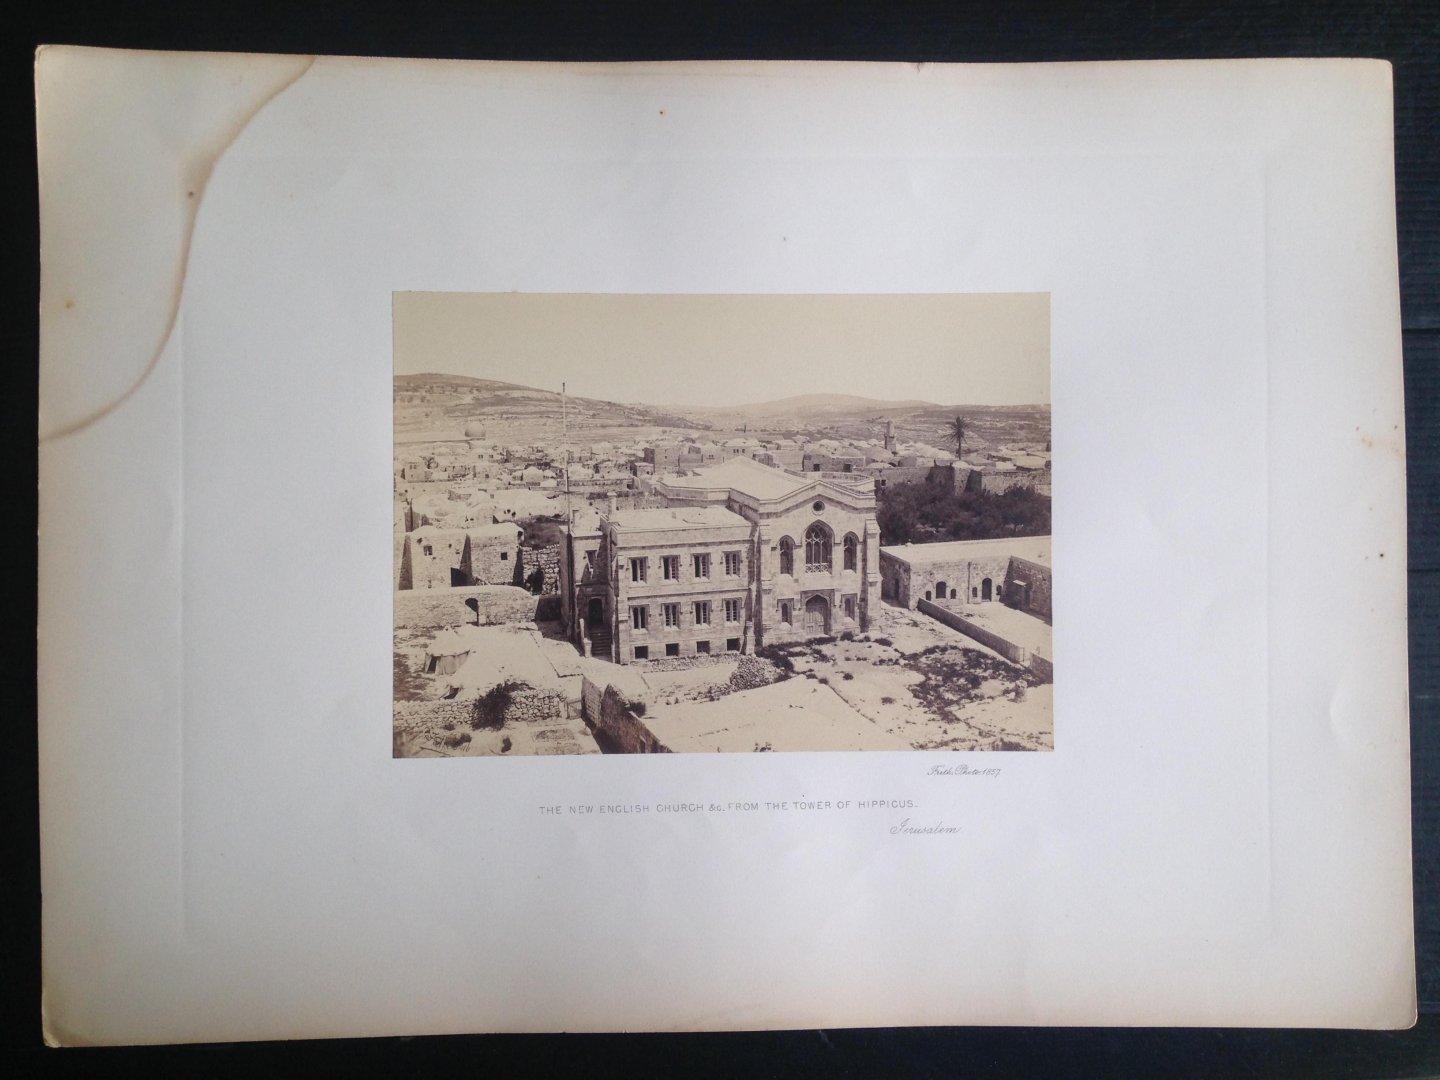 Frith, Francis - The New English Church & c from the Tower of Hippicus, Jerusalem, Series Egypt and Palestine